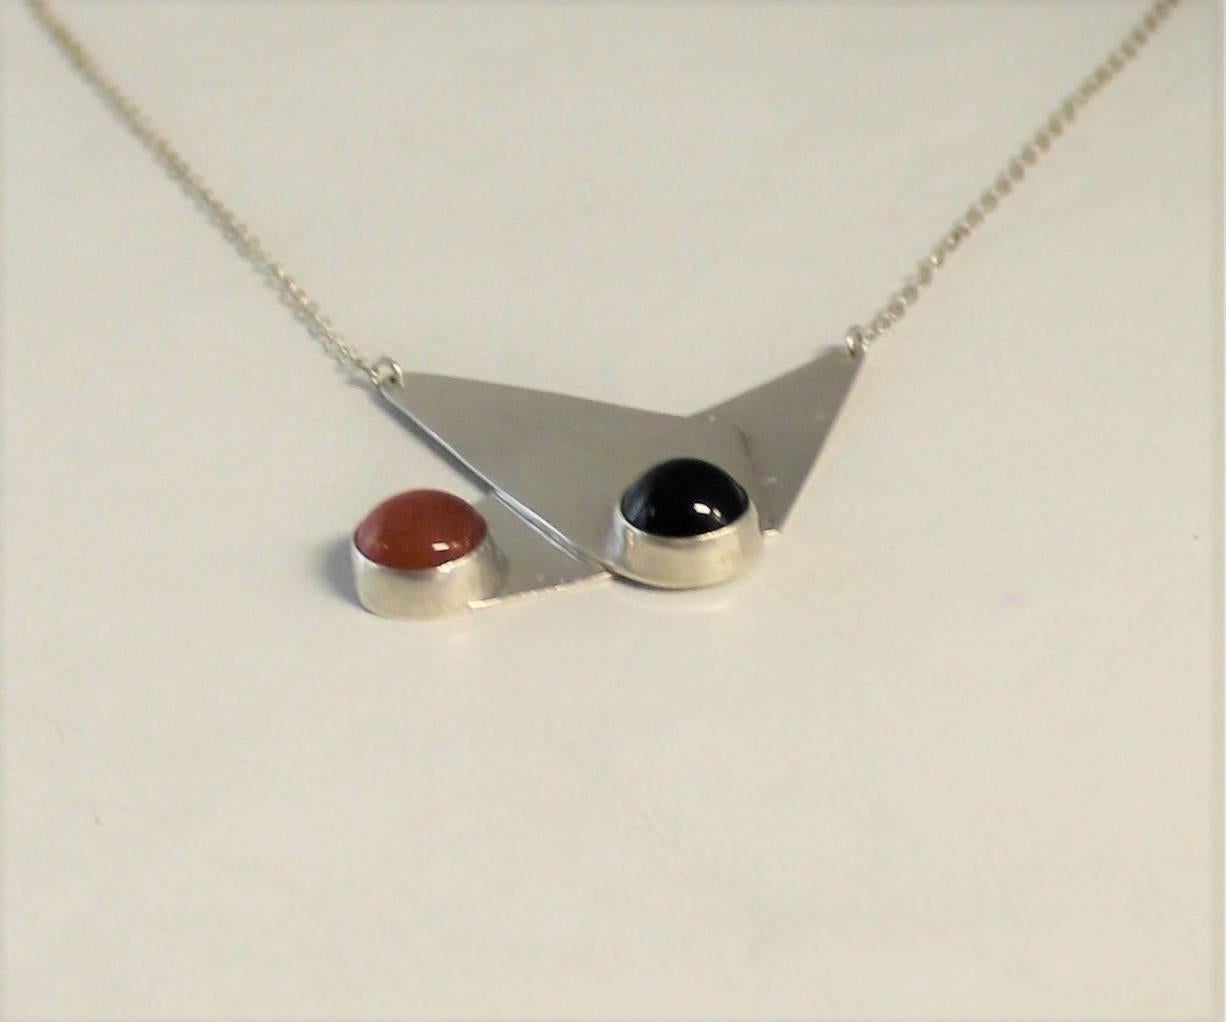 Tigga sterling silver modernist pendant necklace with carnelian and onyx.